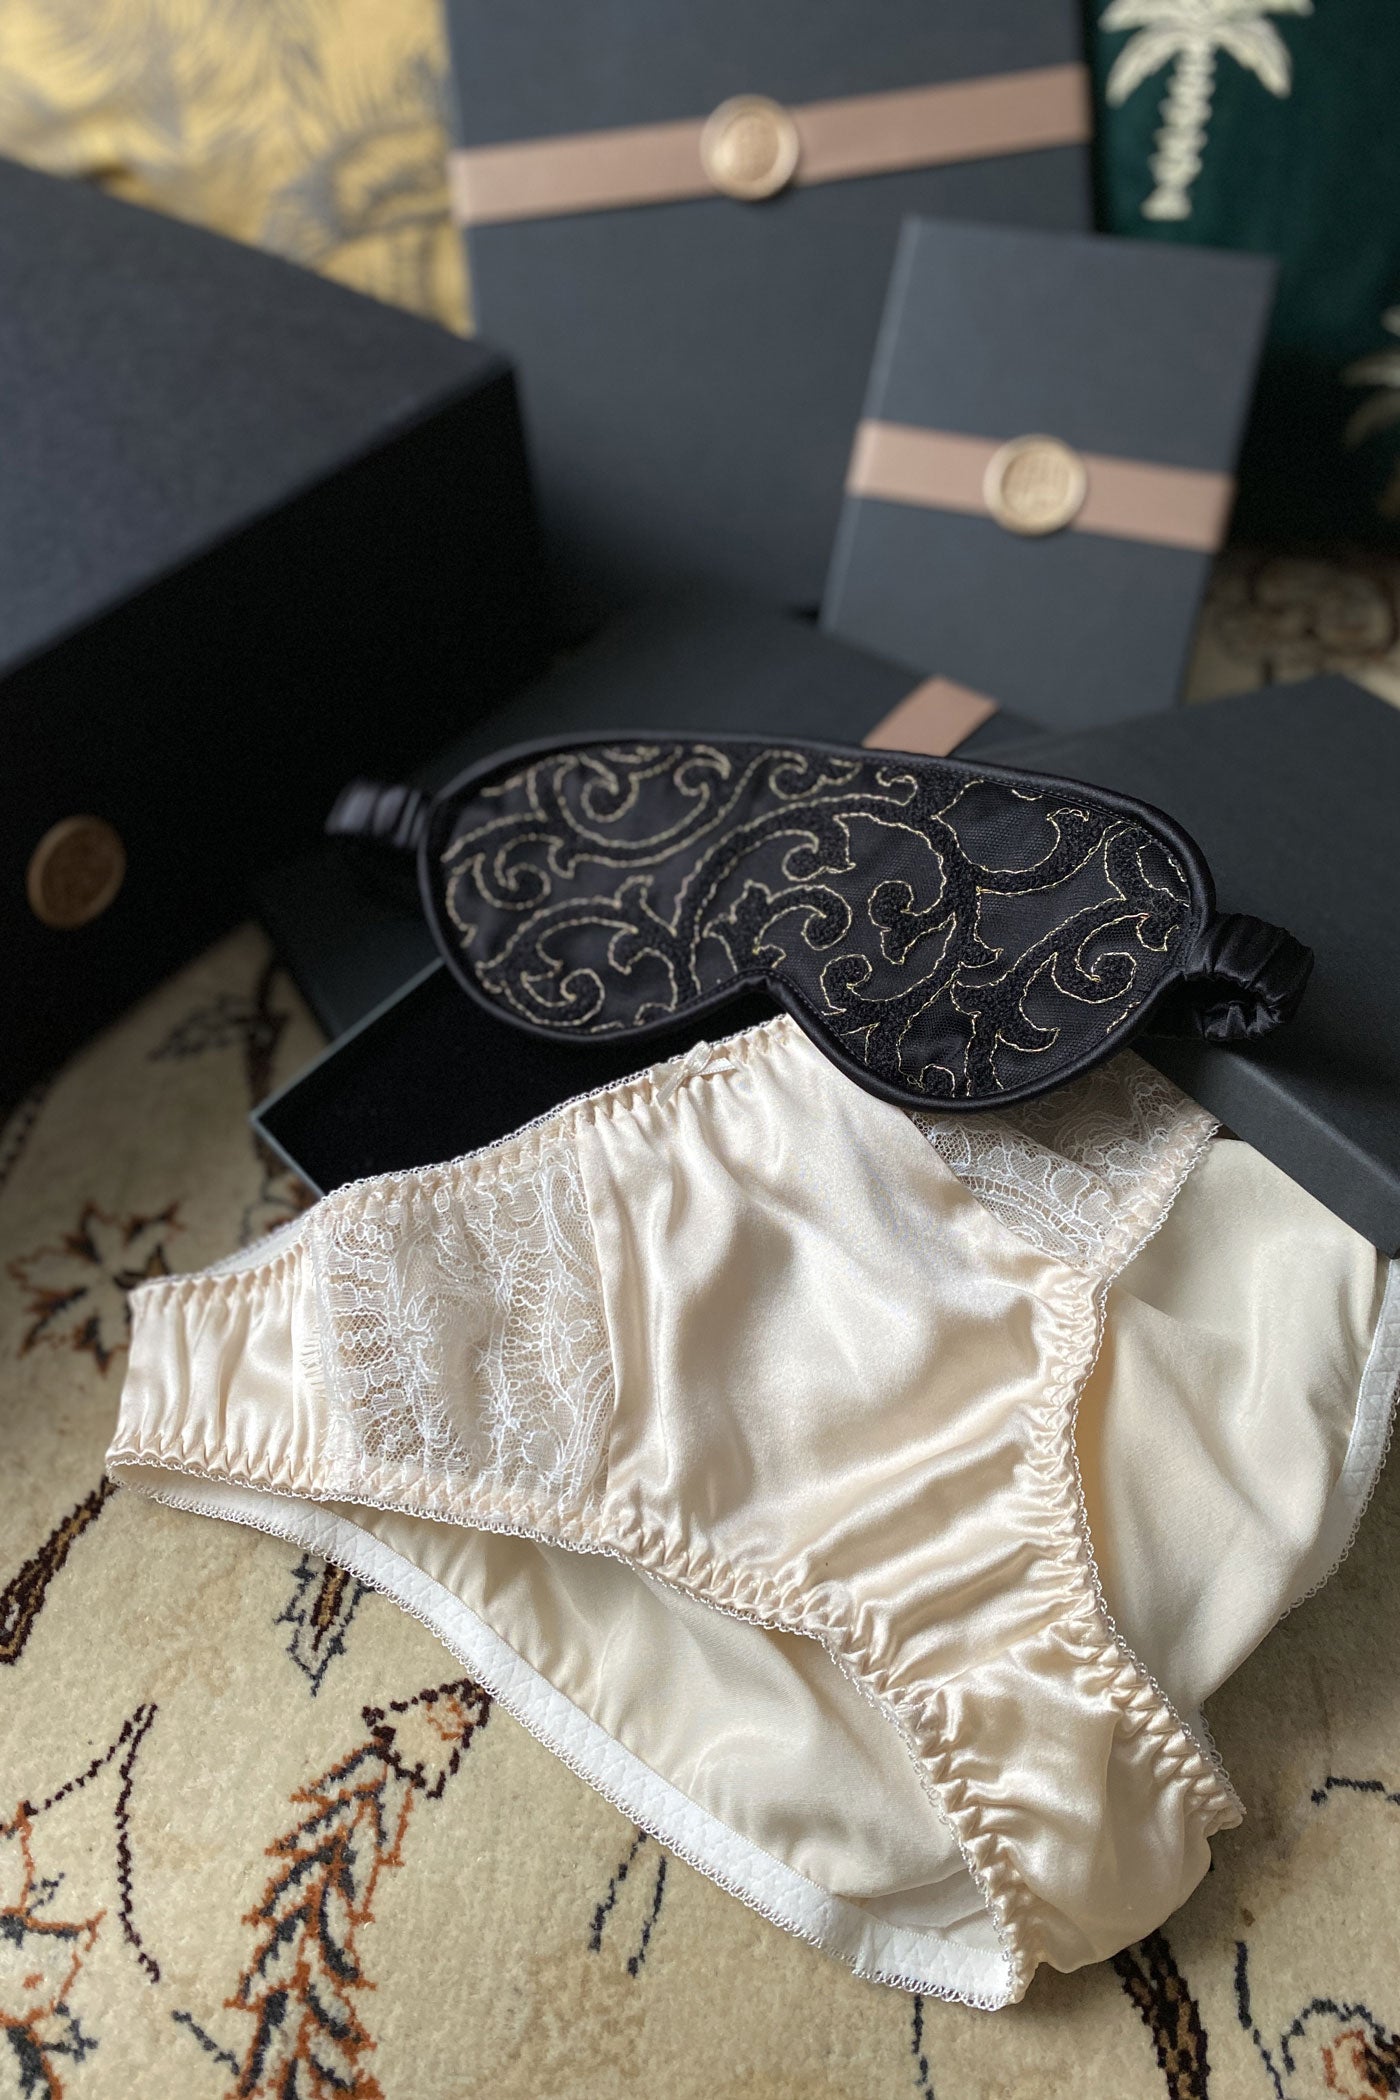 Cream silk knickers with ivory lace and black and gold eye mask with gift boxes